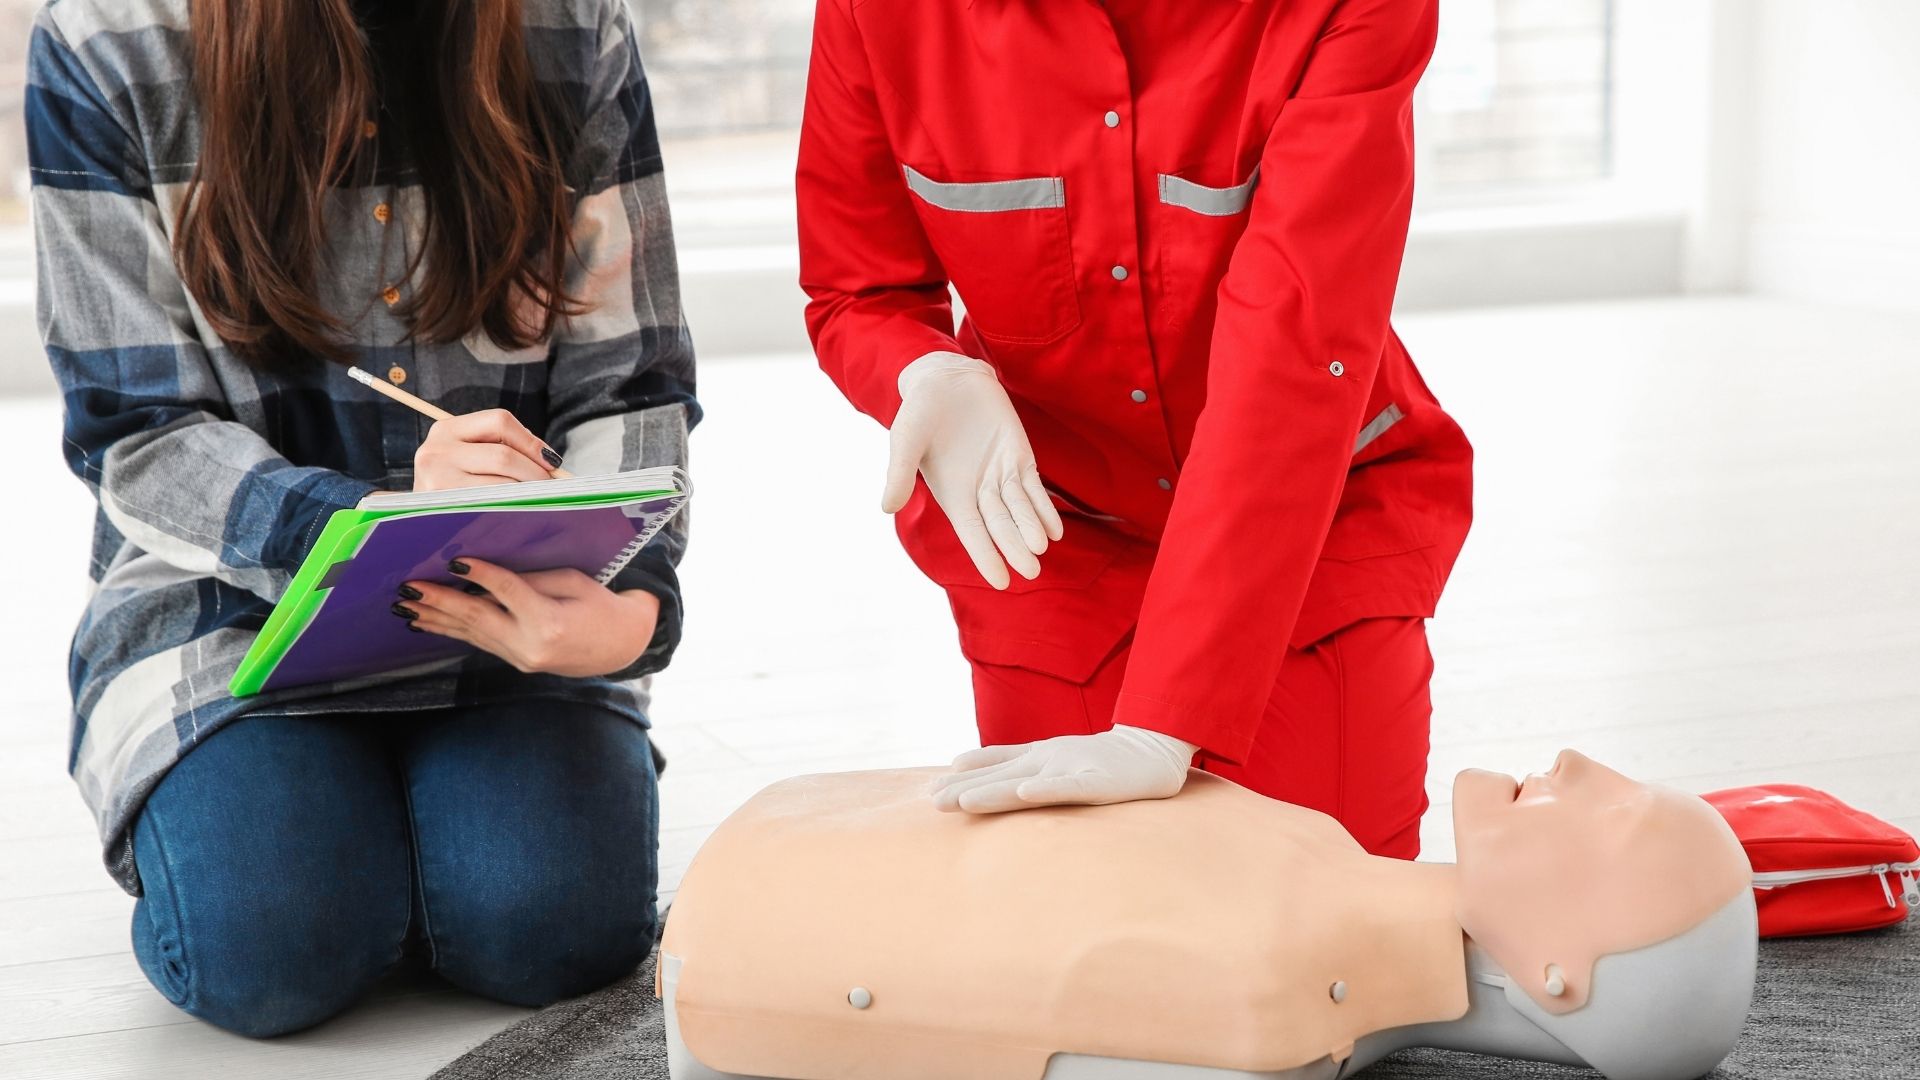 CPR Certification For a fitness instructor